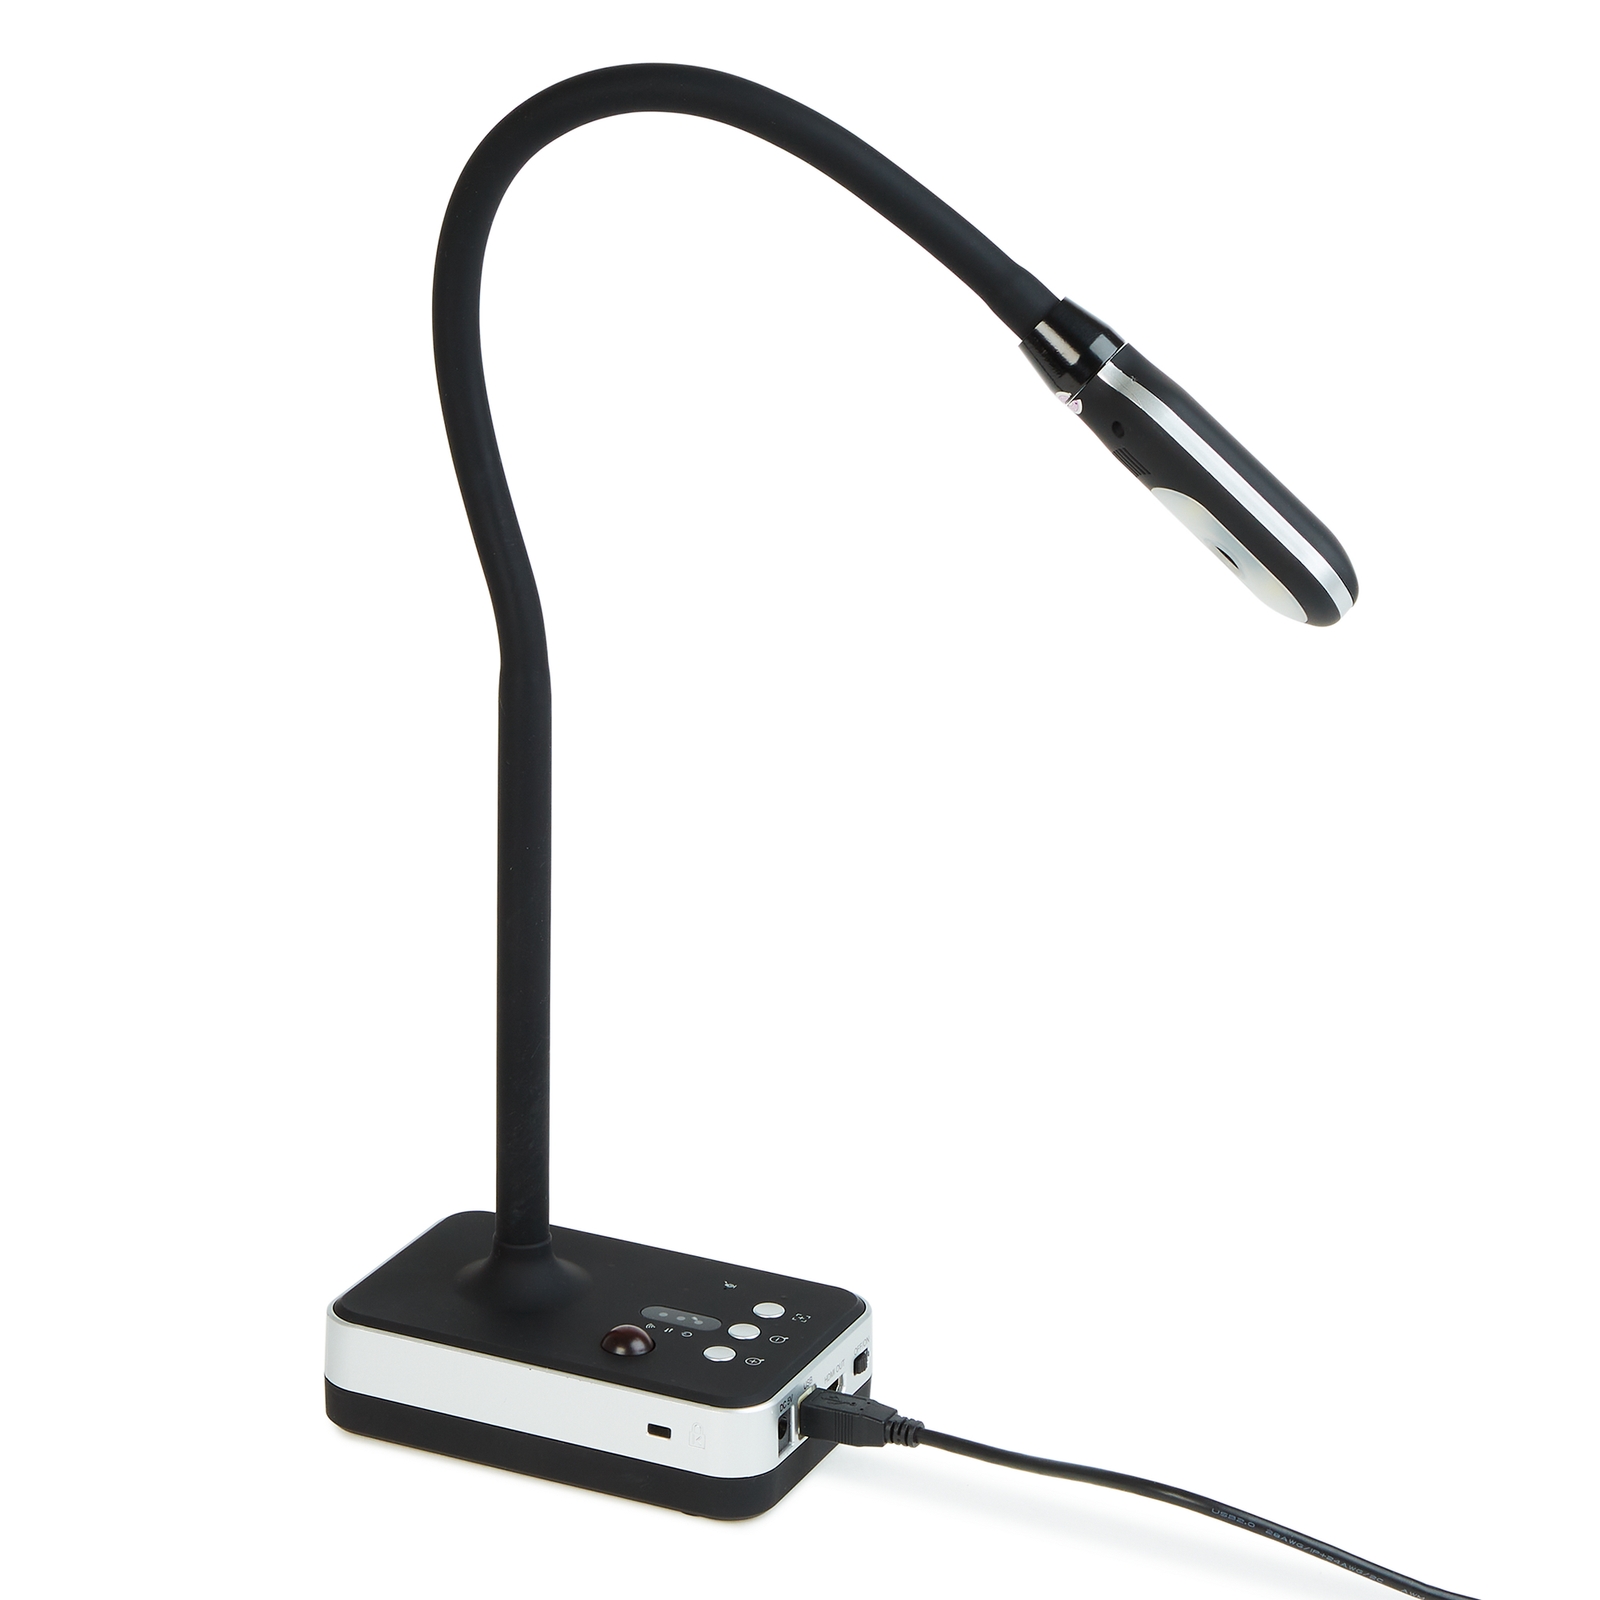 10MP A3 USB Visualiser from Hope Education